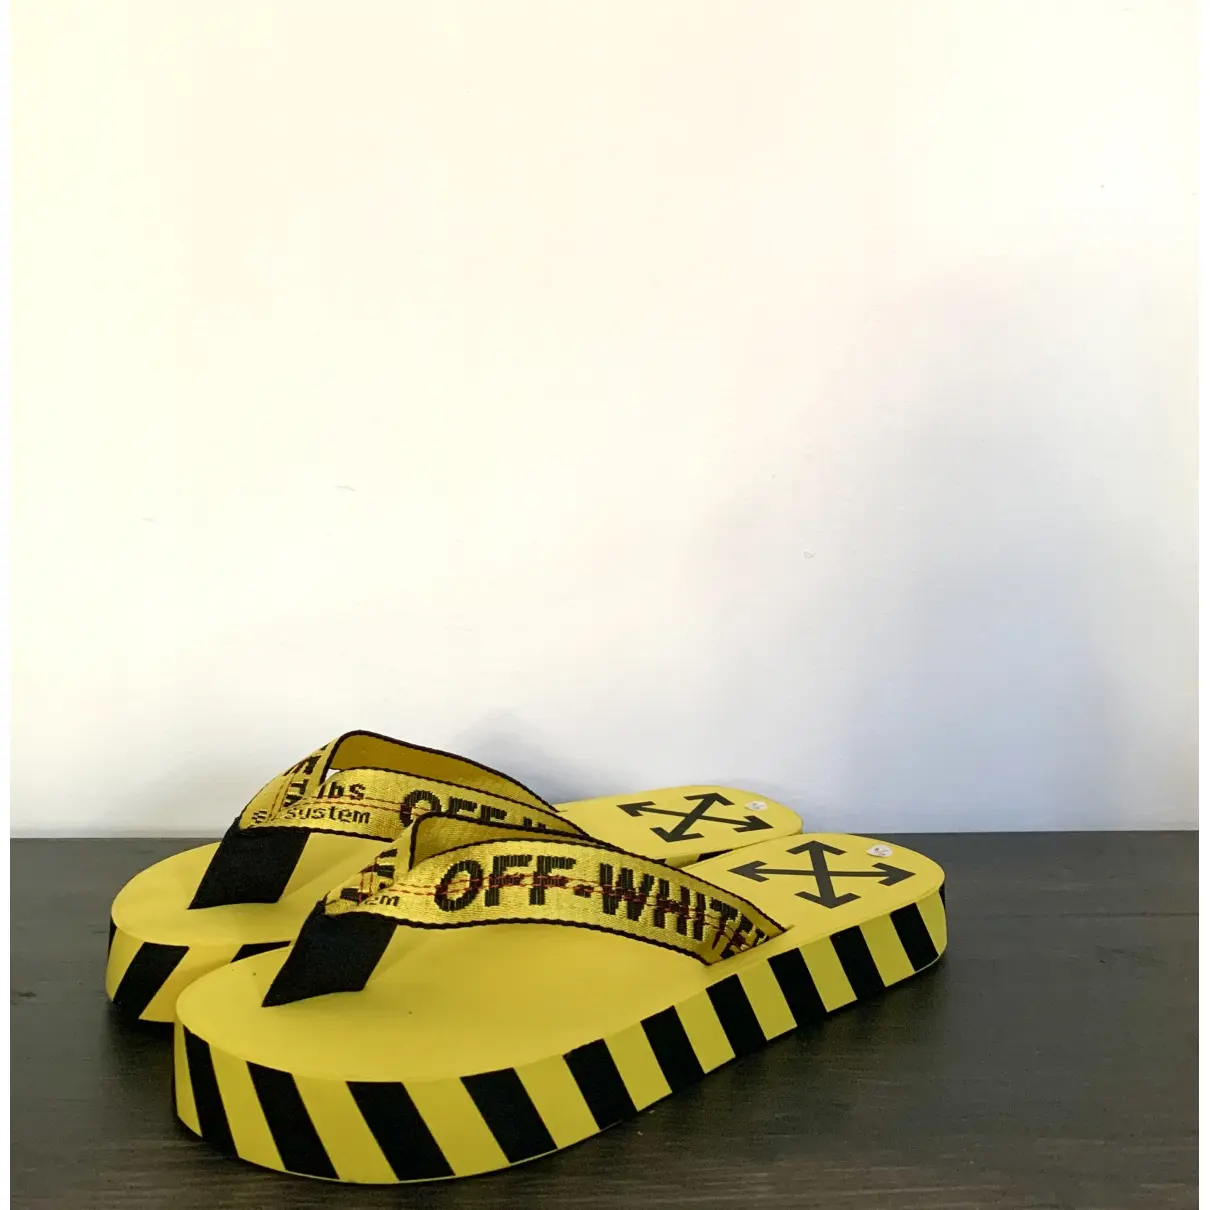 Buy Off-White Sandals online